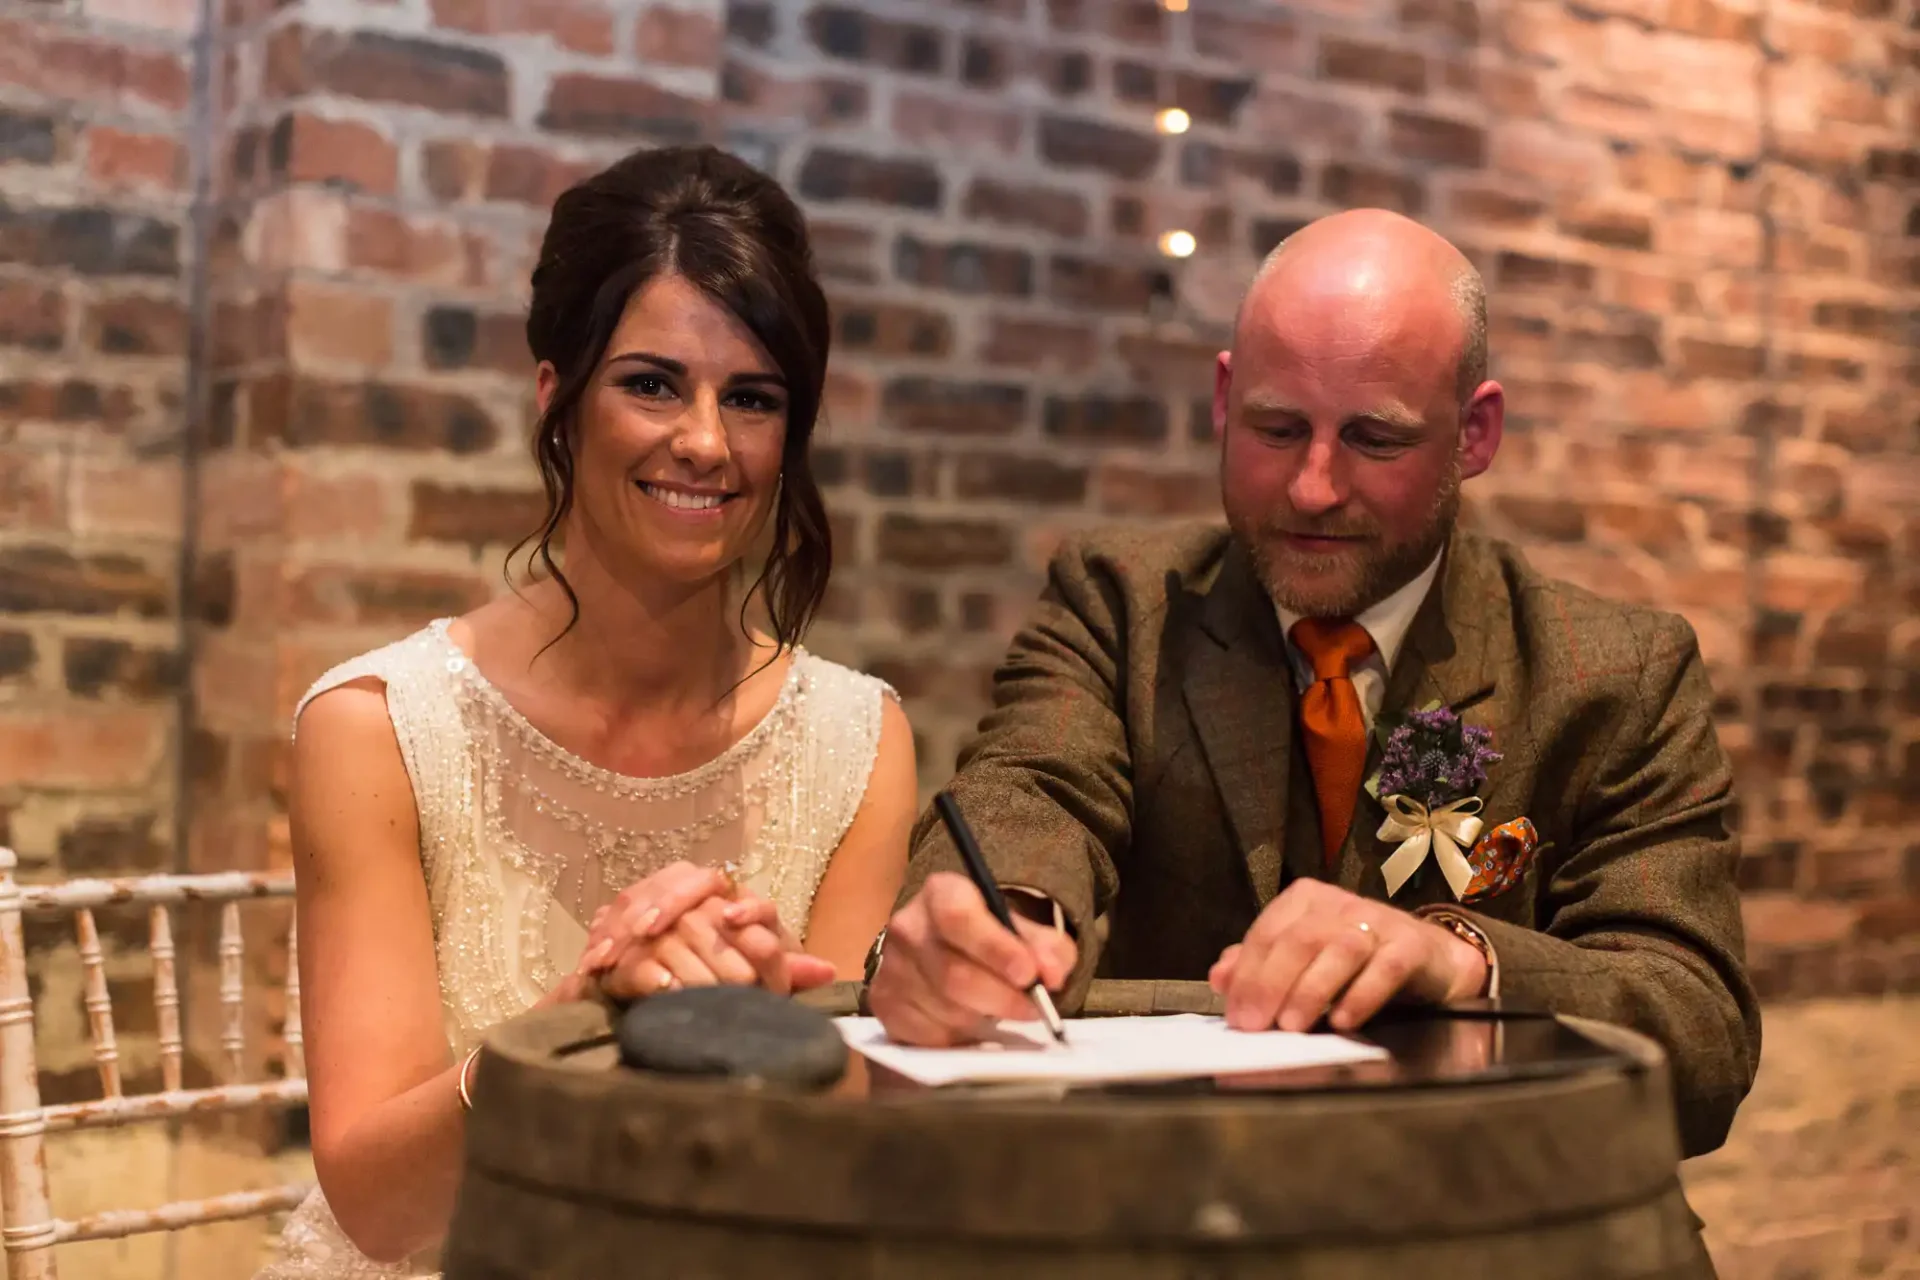 A bride and groom smiling while signing their marriage certificate at a table with a rustic brick backdrop.